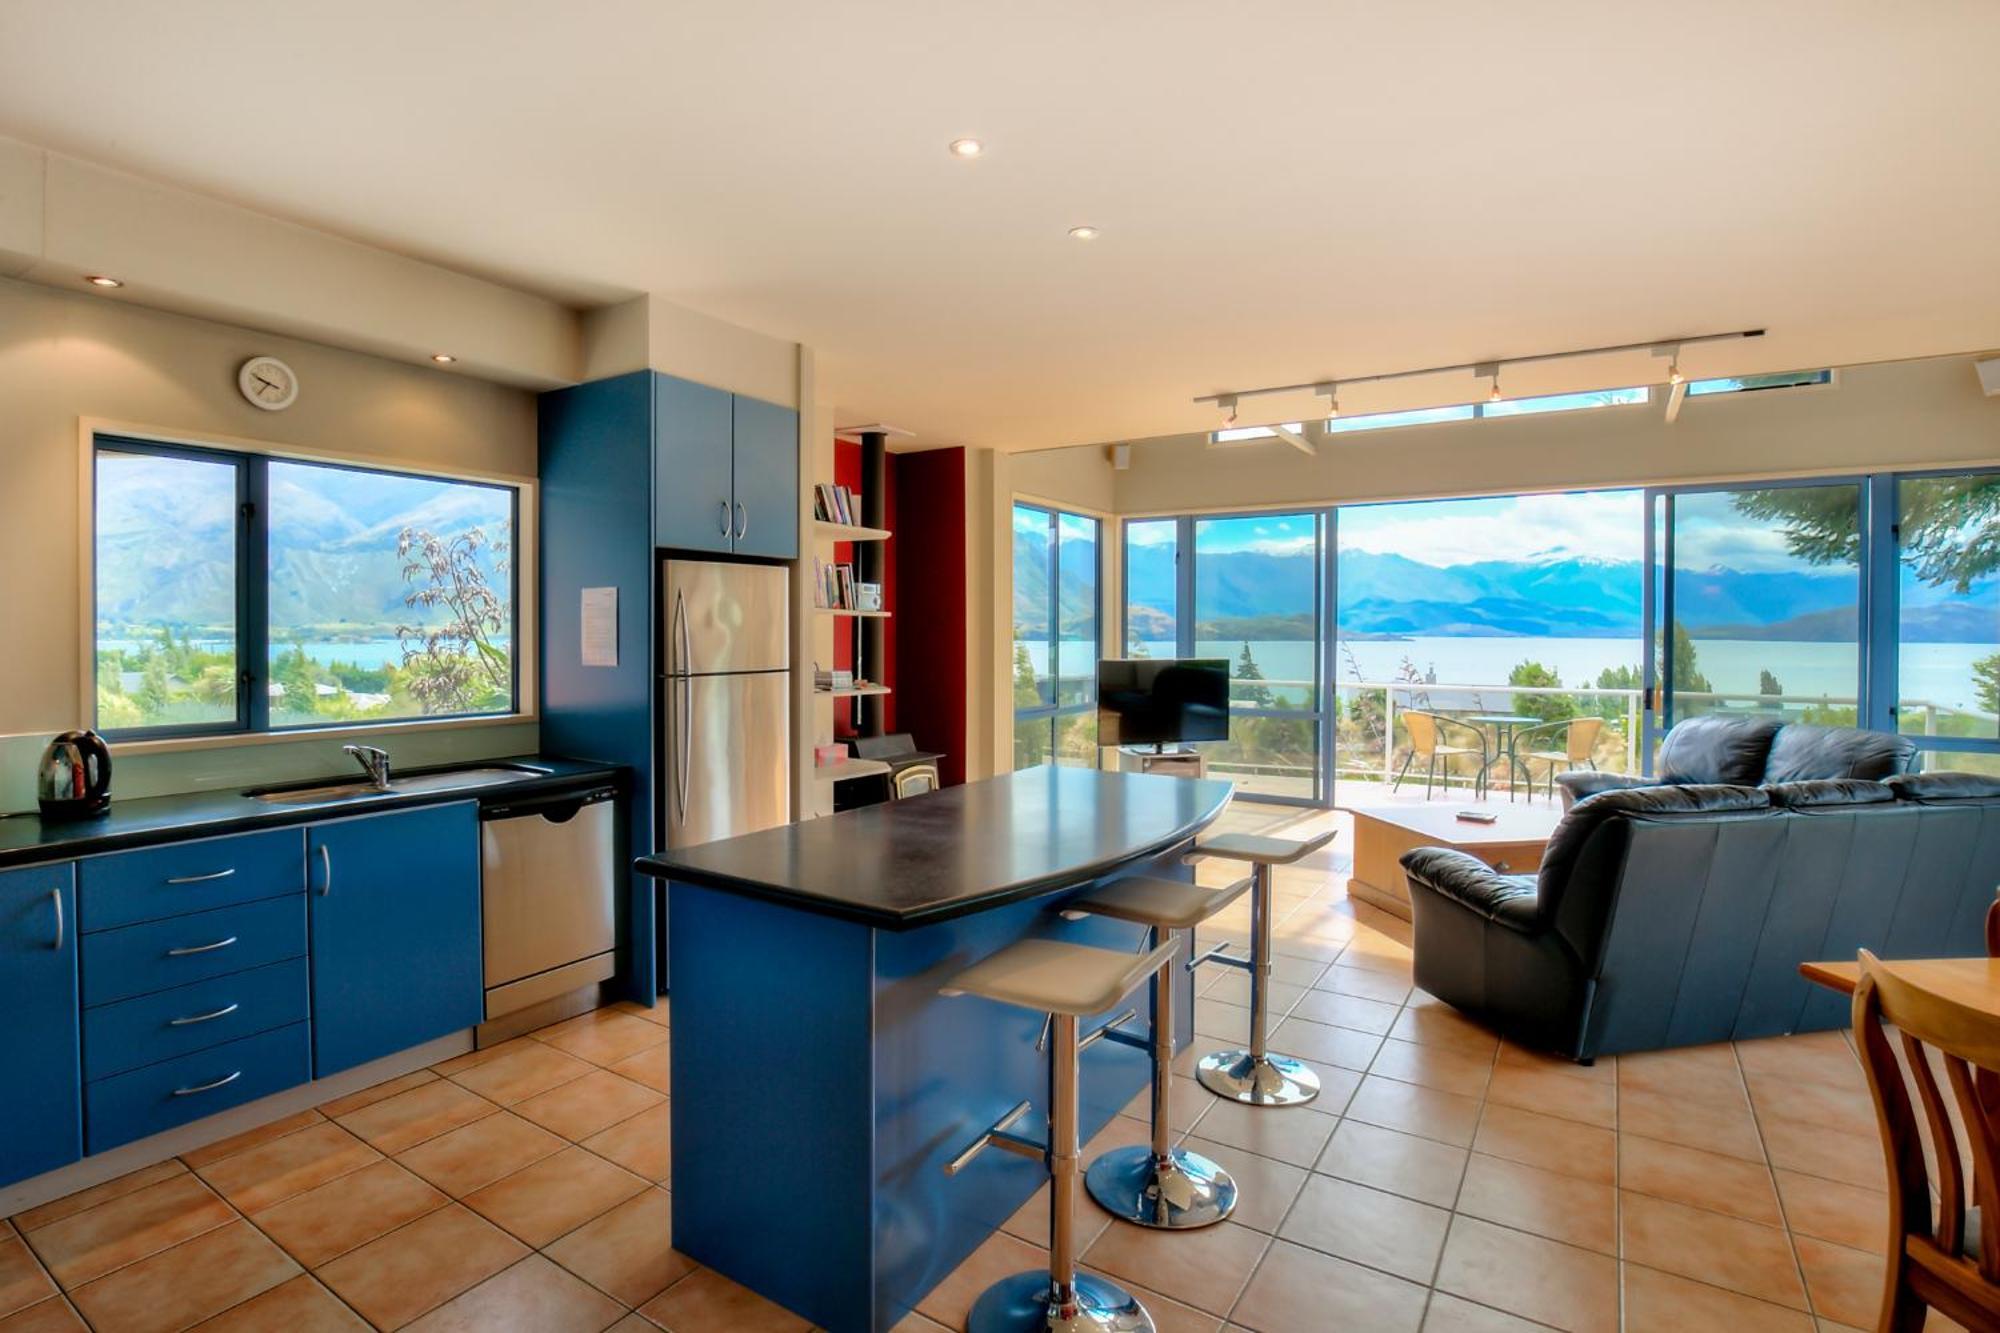 Tawhiri - Tranquility, Space And Stunning Views In Paradise 瓦纳卡 外观 照片